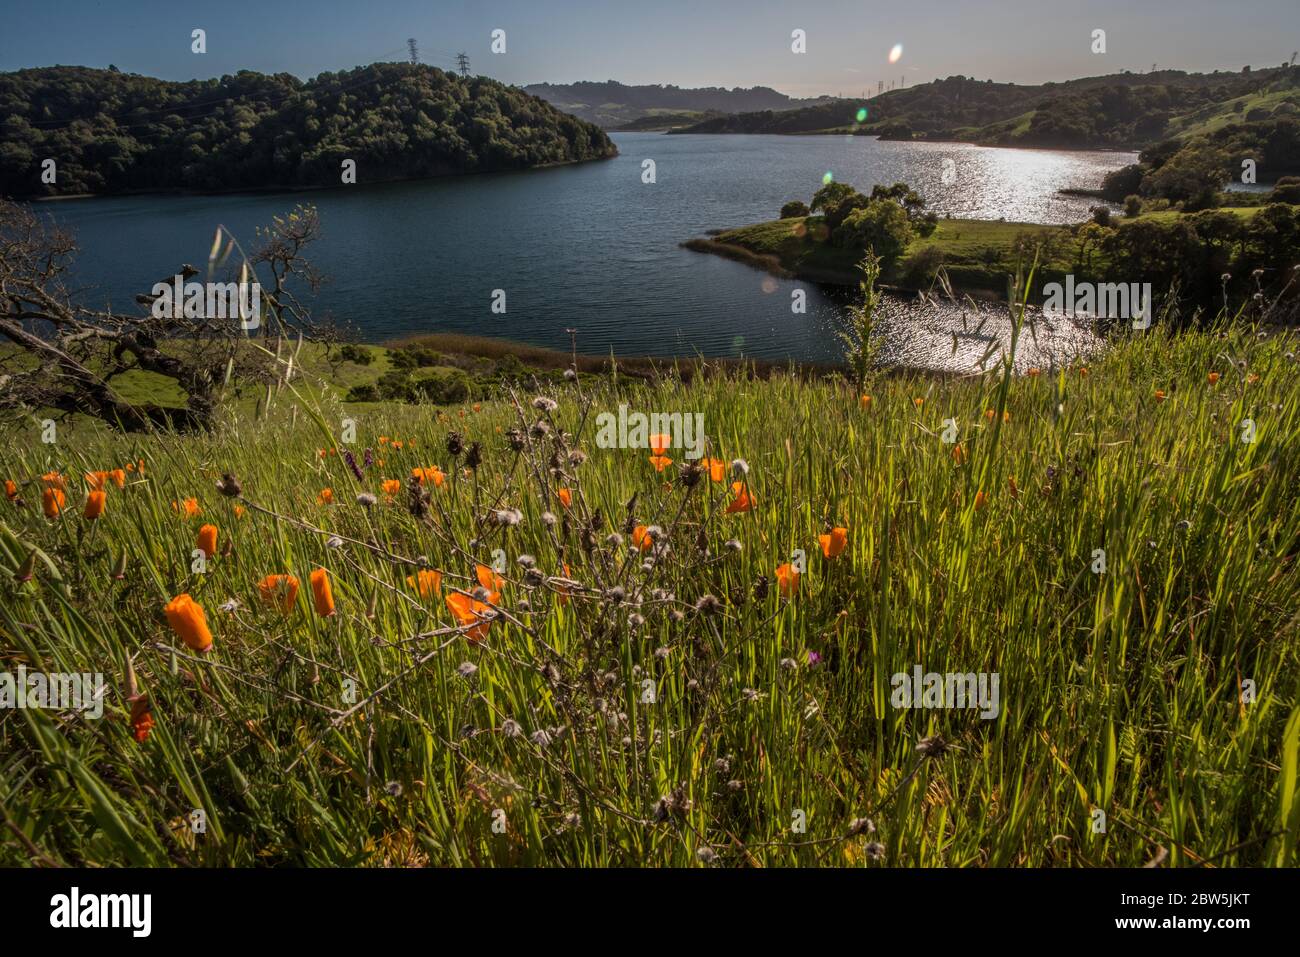 Briones reservoir in the East bay on a sunny day in the spring when flowers are blooming and vegetation is green. Stock Photo